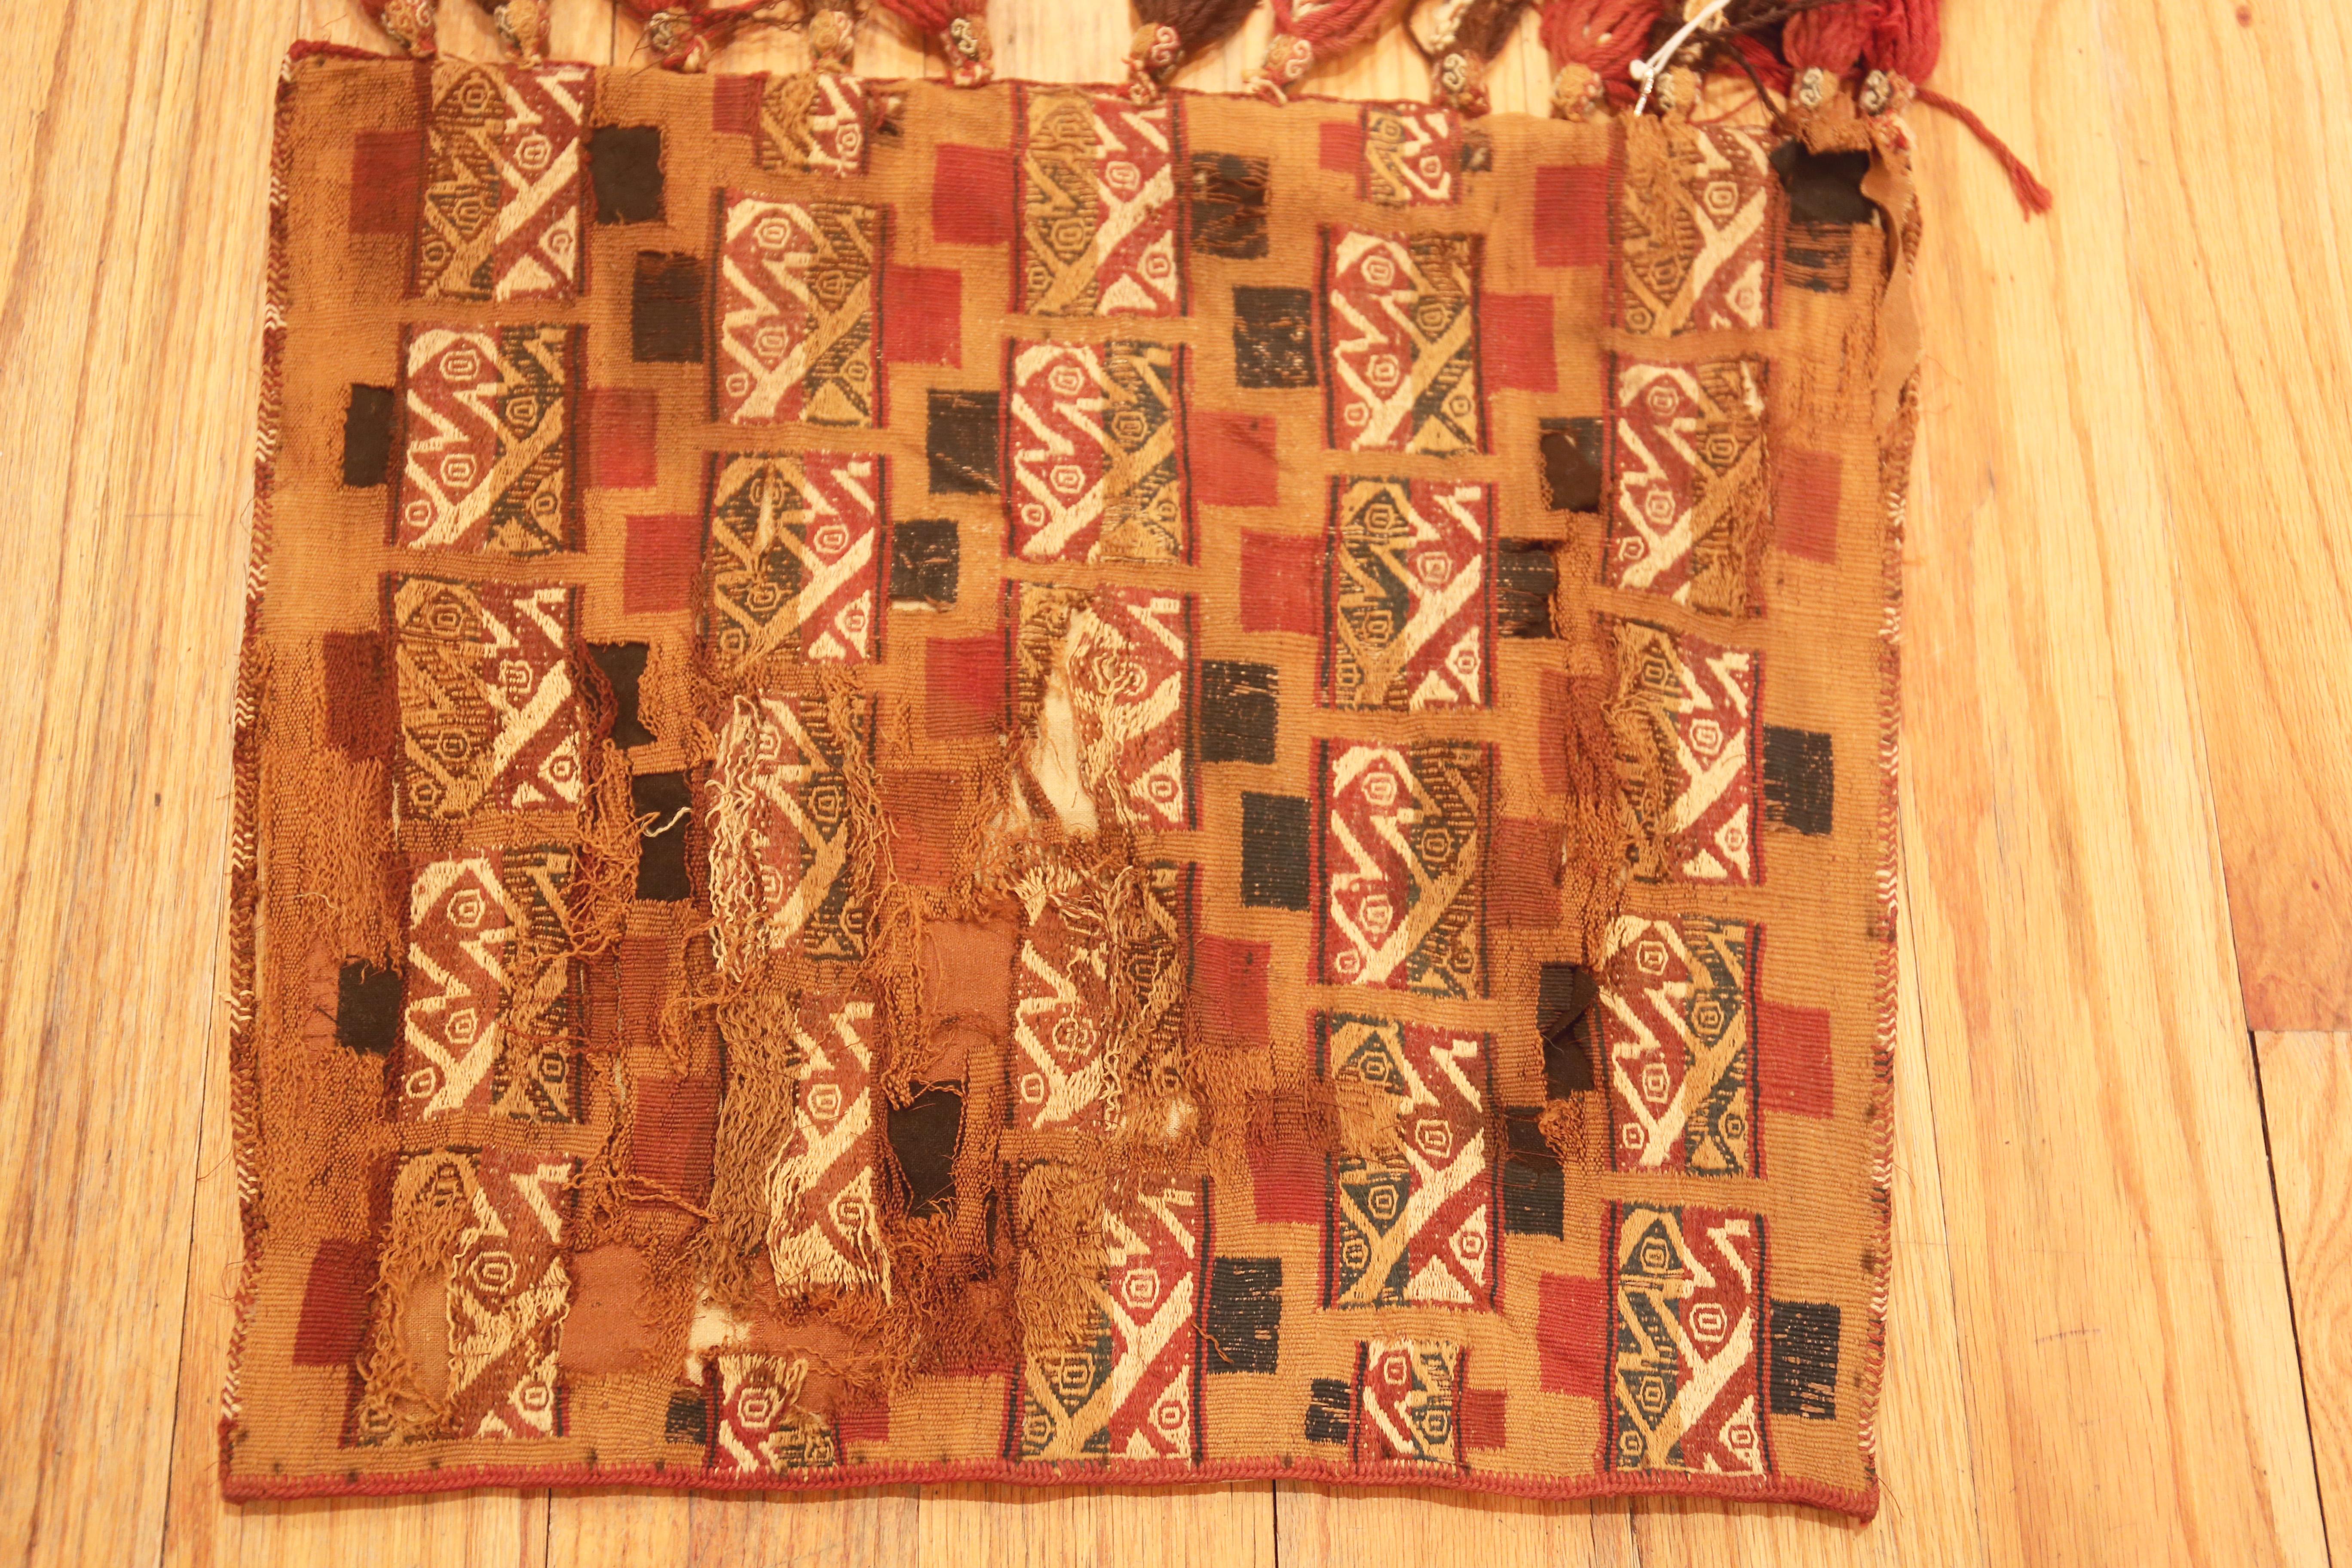 Hand-Woven Amazing Early 16th Century Peruvian Textile 1'2